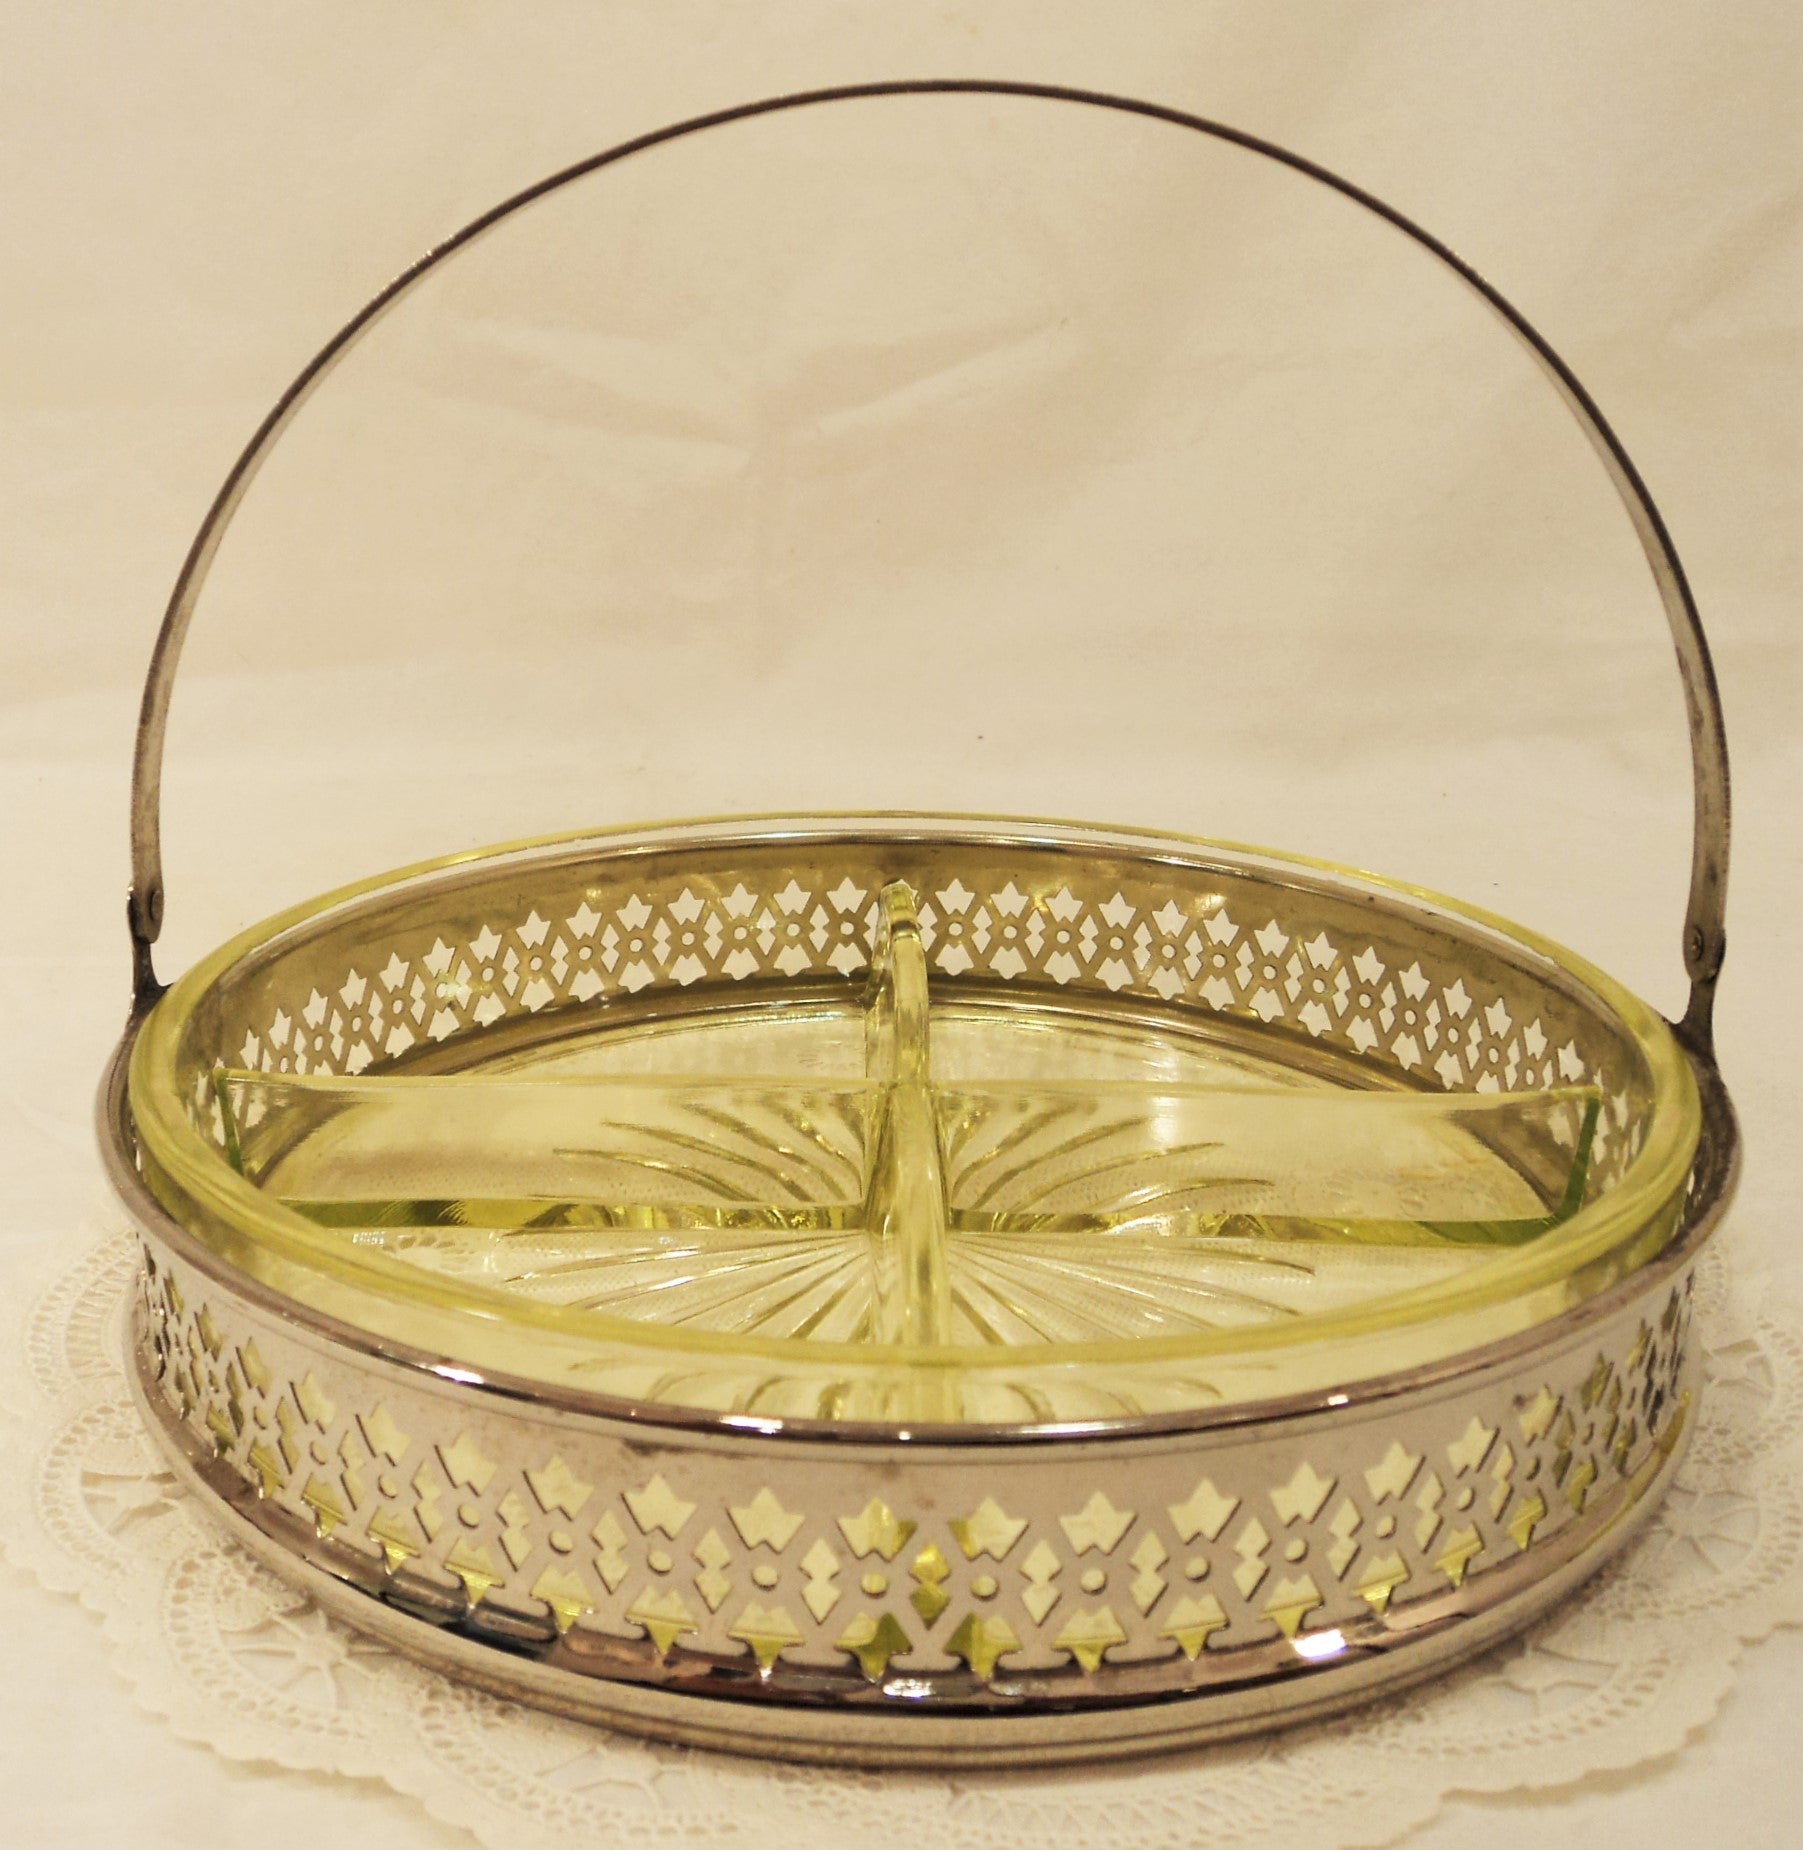 Vaseline Glass Divided Dish with Carrying Tray